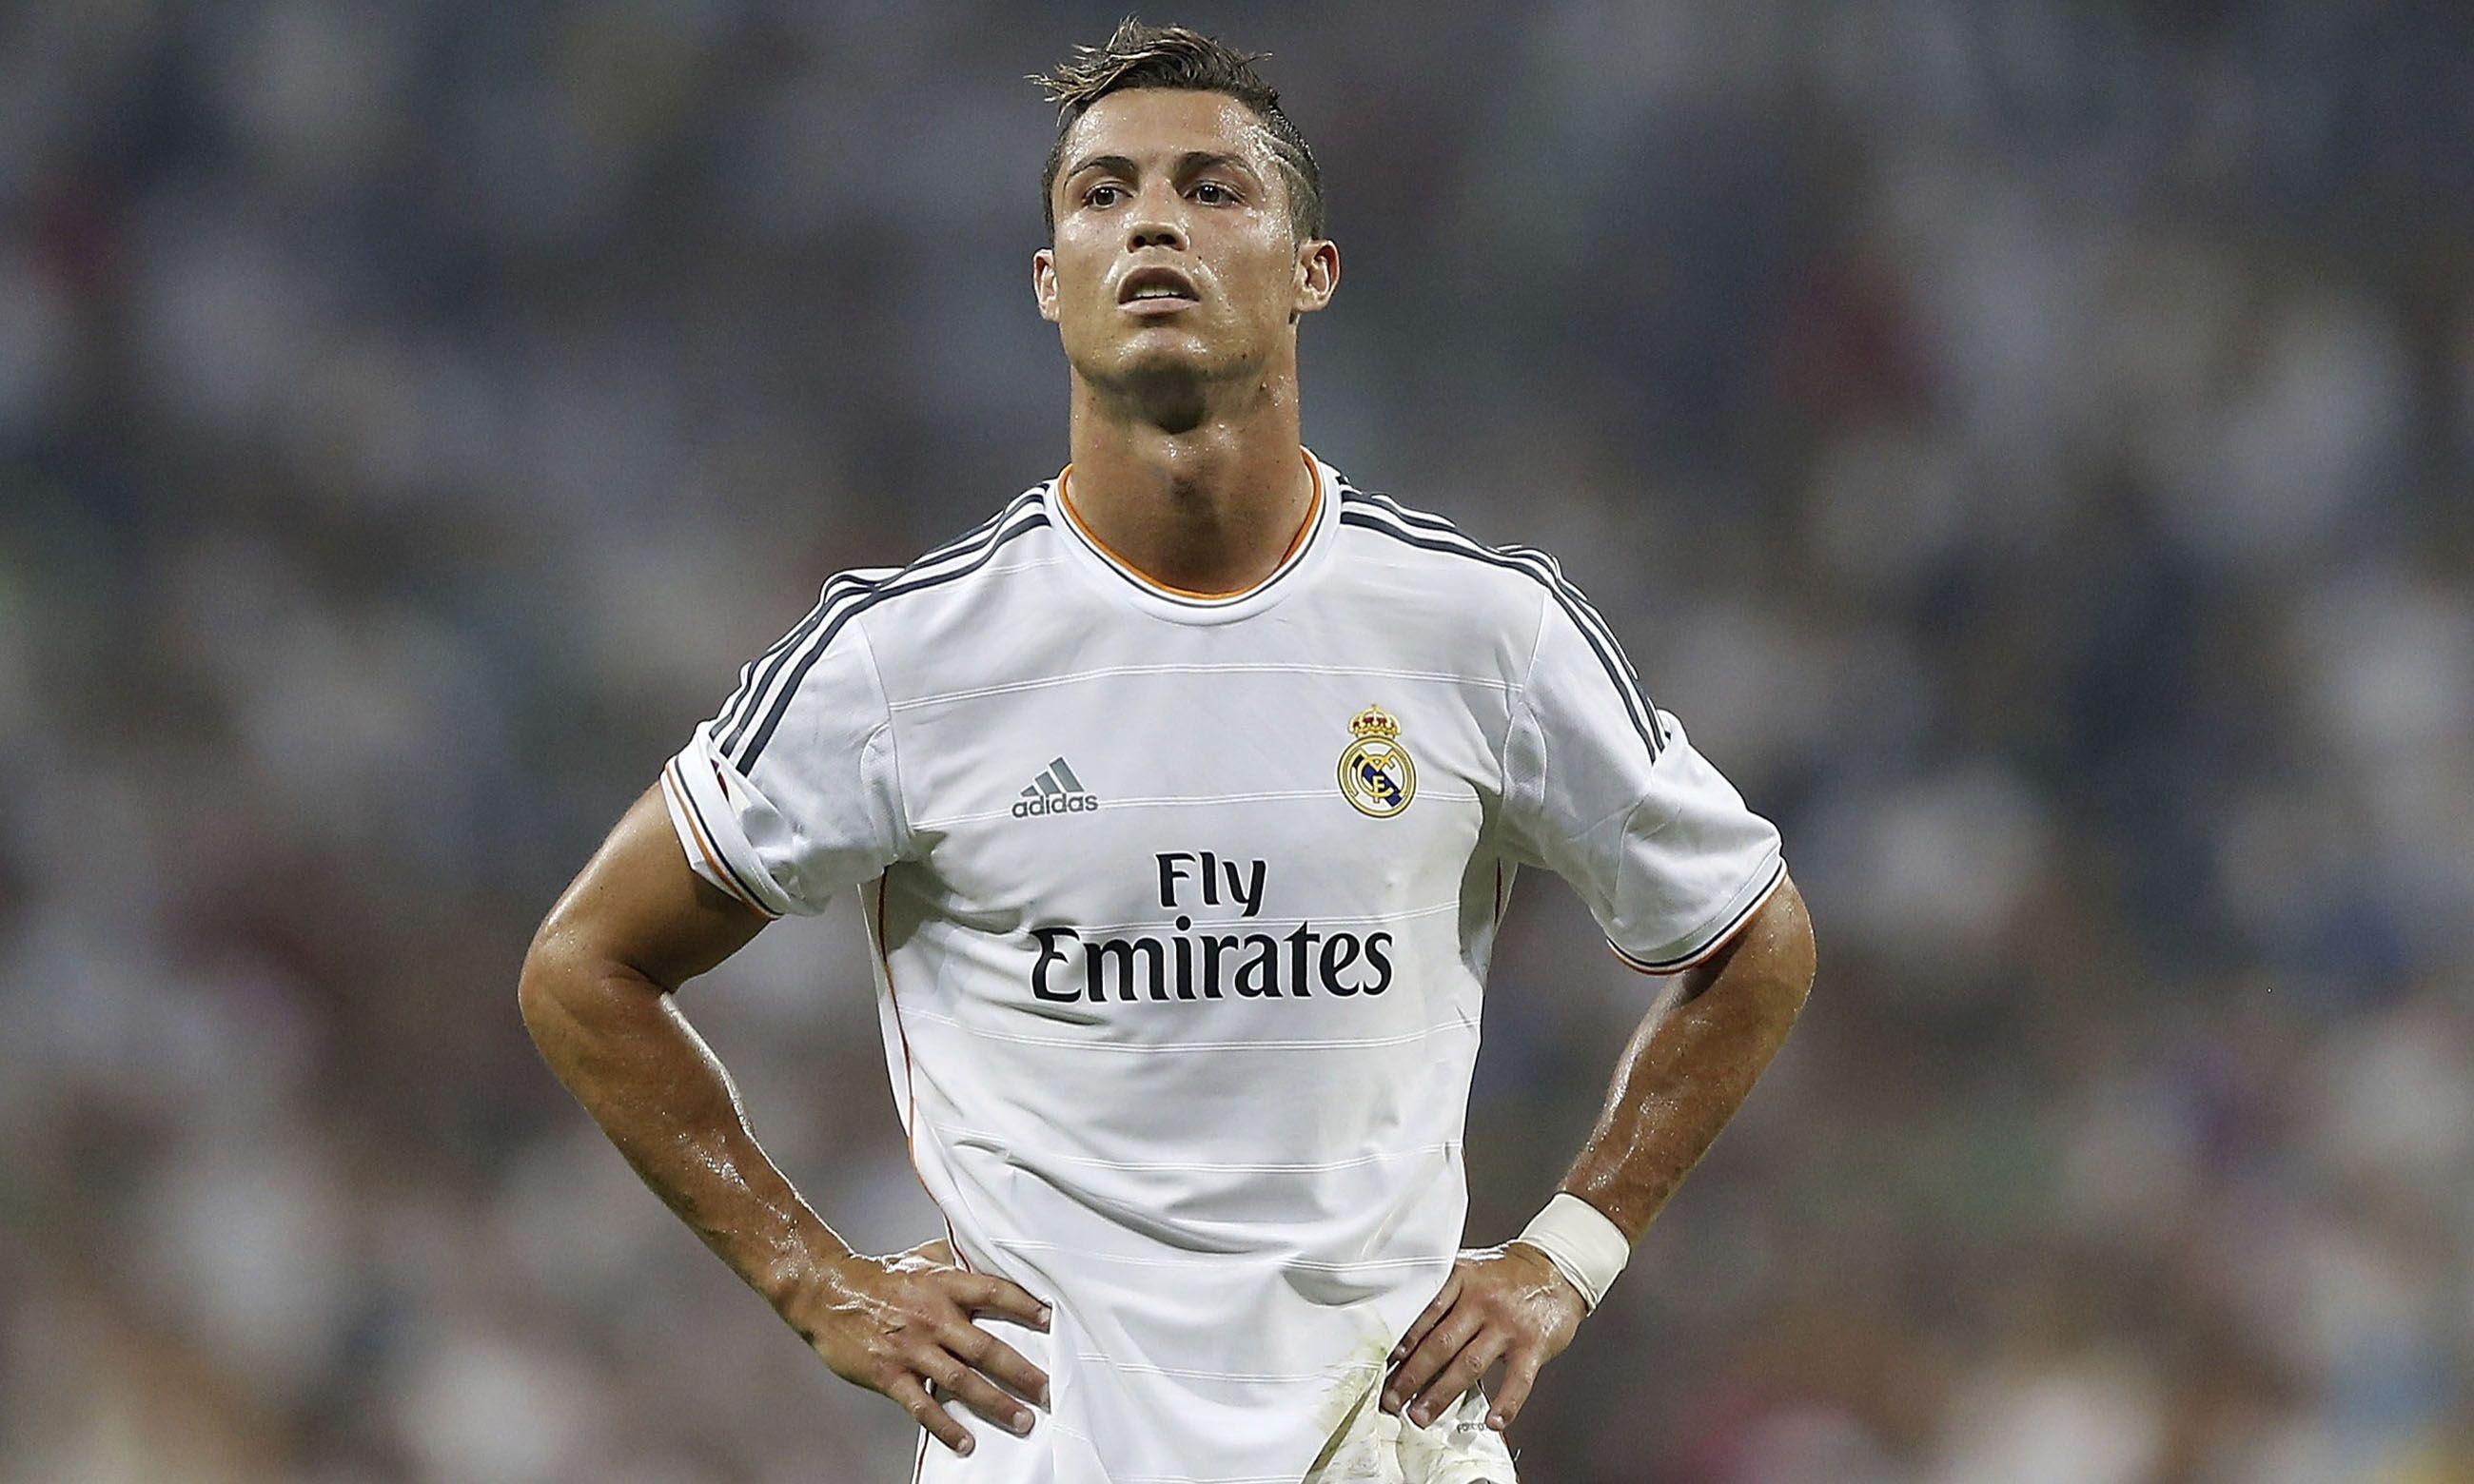 Top 10 highest paid footballers in the World in 2014